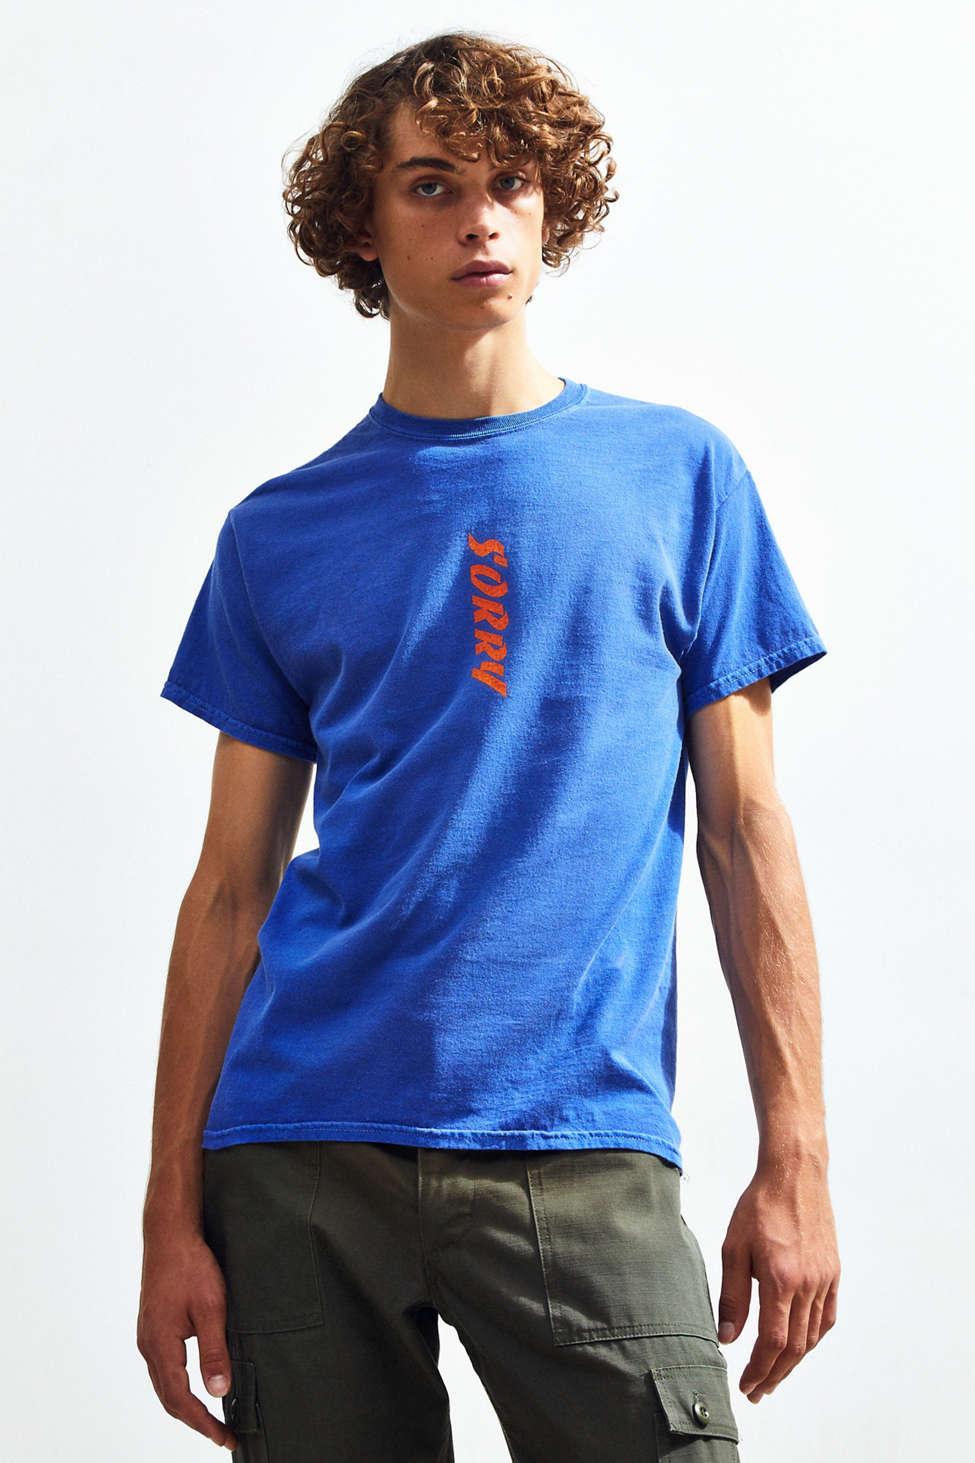 Urban Outfitters Cotton Sorry Can't Please 'em All Tee in Blue for 